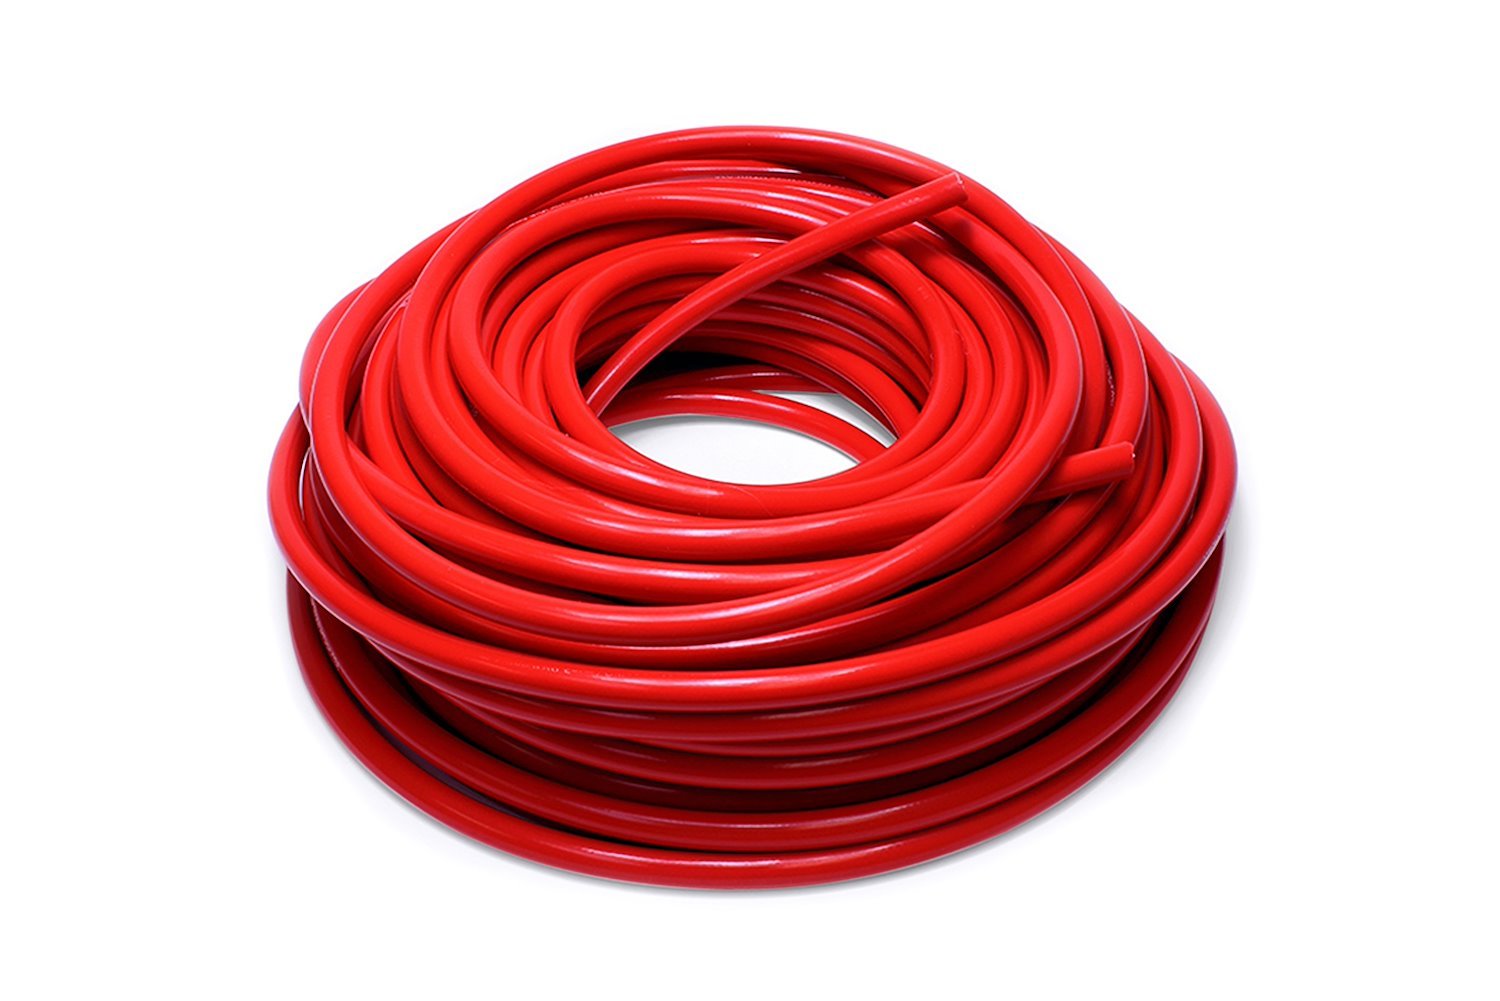 HTHH-025-REDx100 Silicone Heater Hose Tubing, High-Temp 1-Ply Reinforced, 1/4 in. ID, 100 ft. Roll, Red